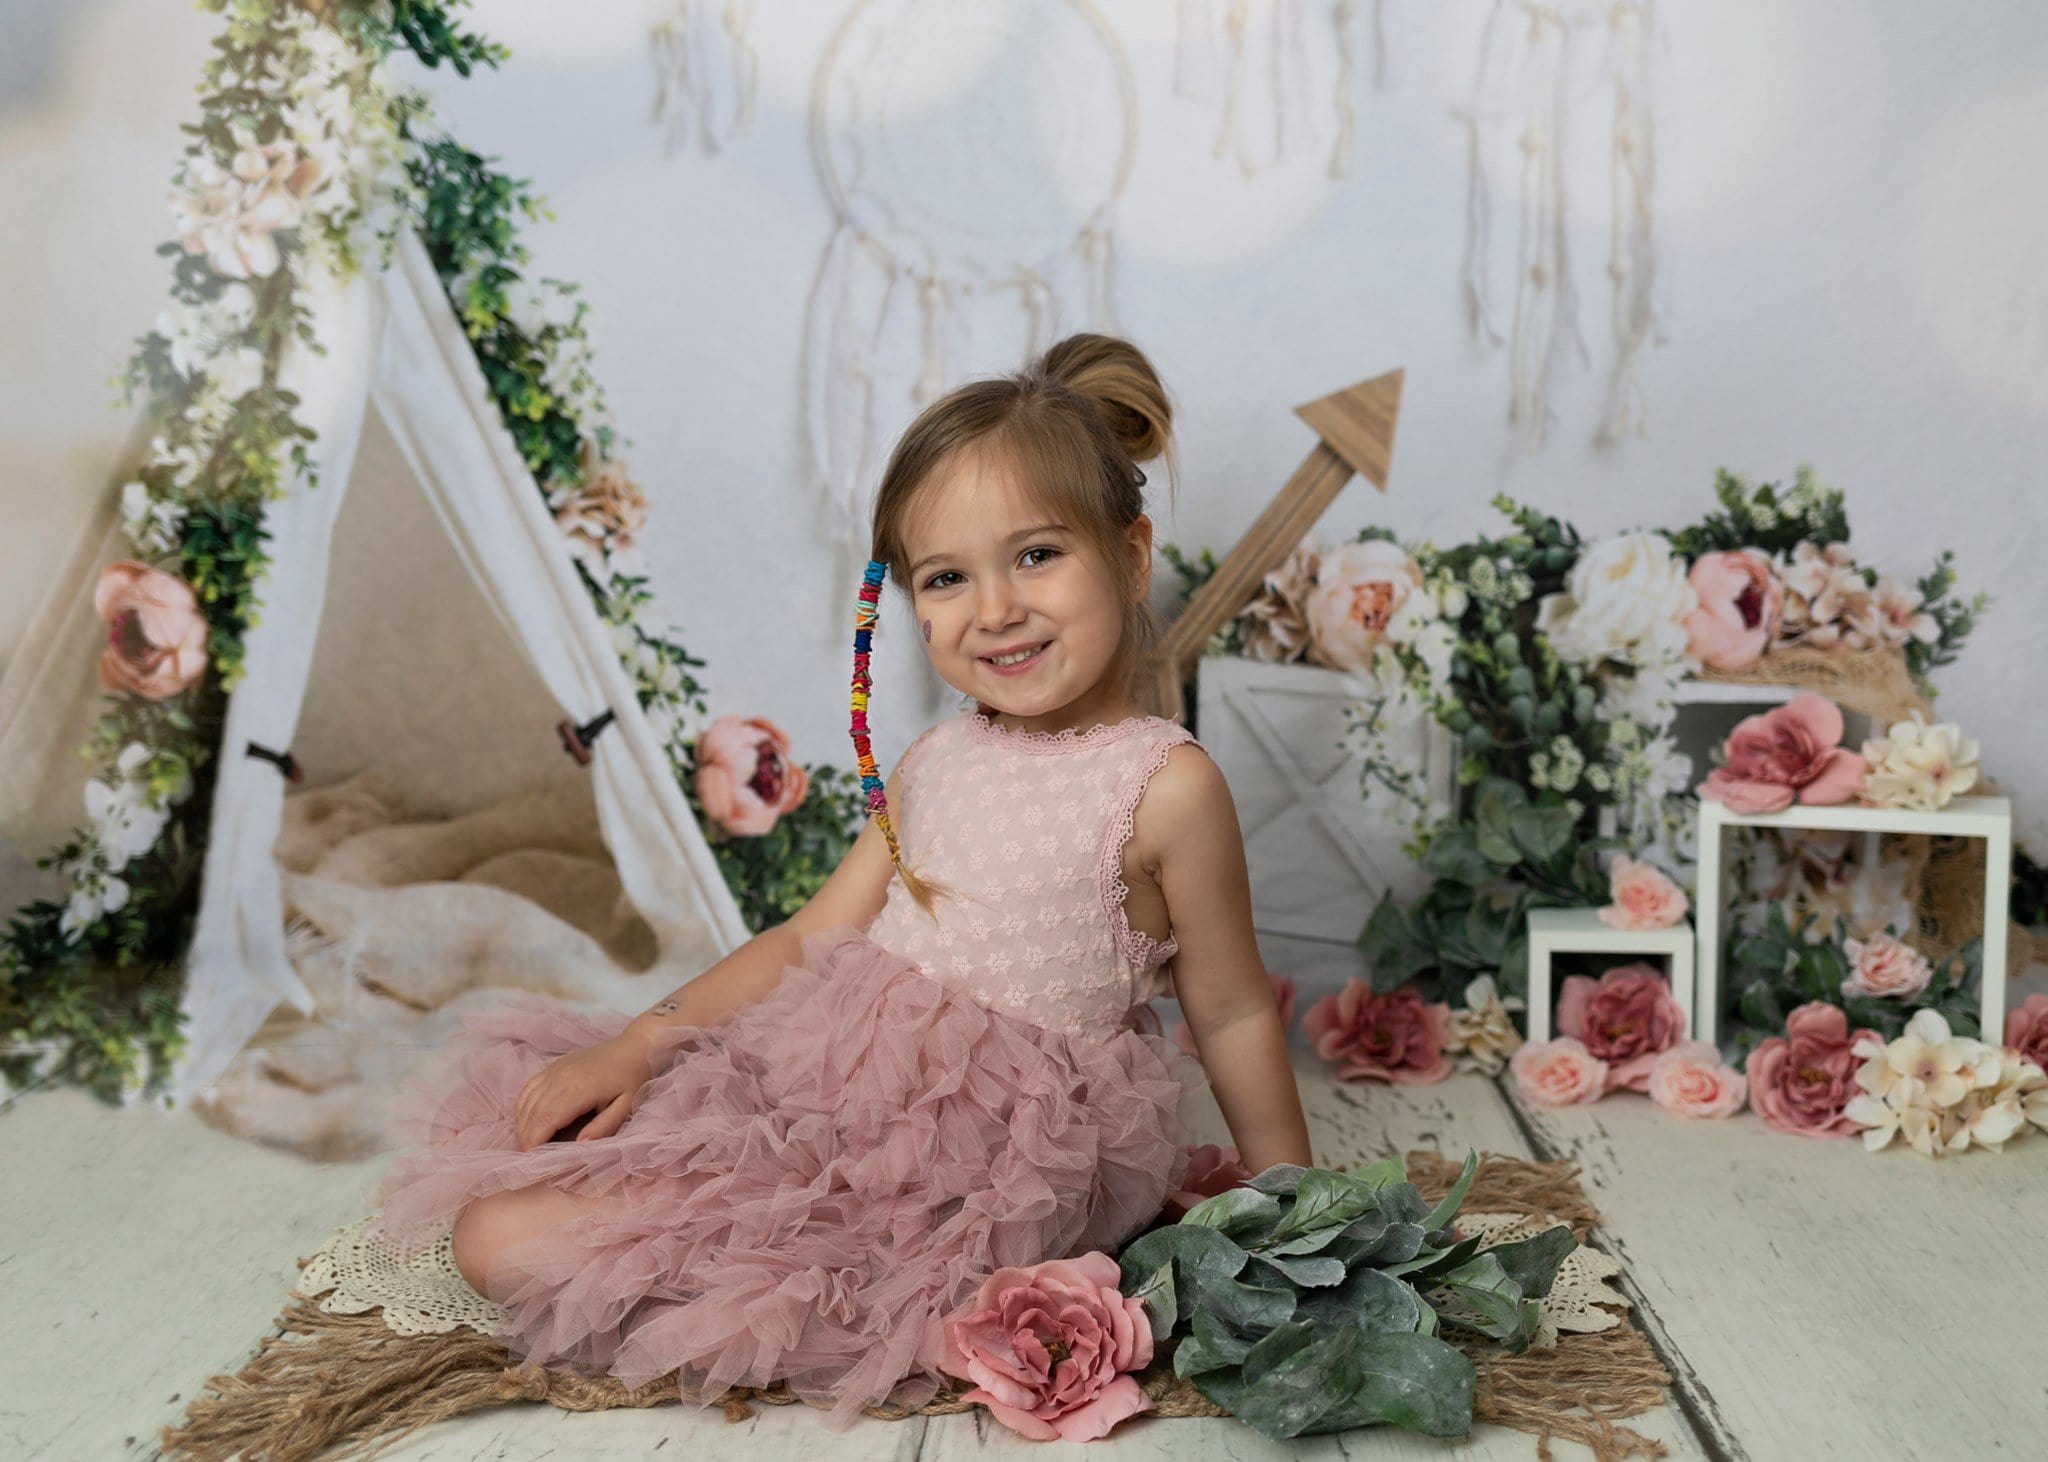 Kate Mother's Day Boho Teepee Spring Backdrop Designed by Megan Leigh Photography - Kate Backdrop